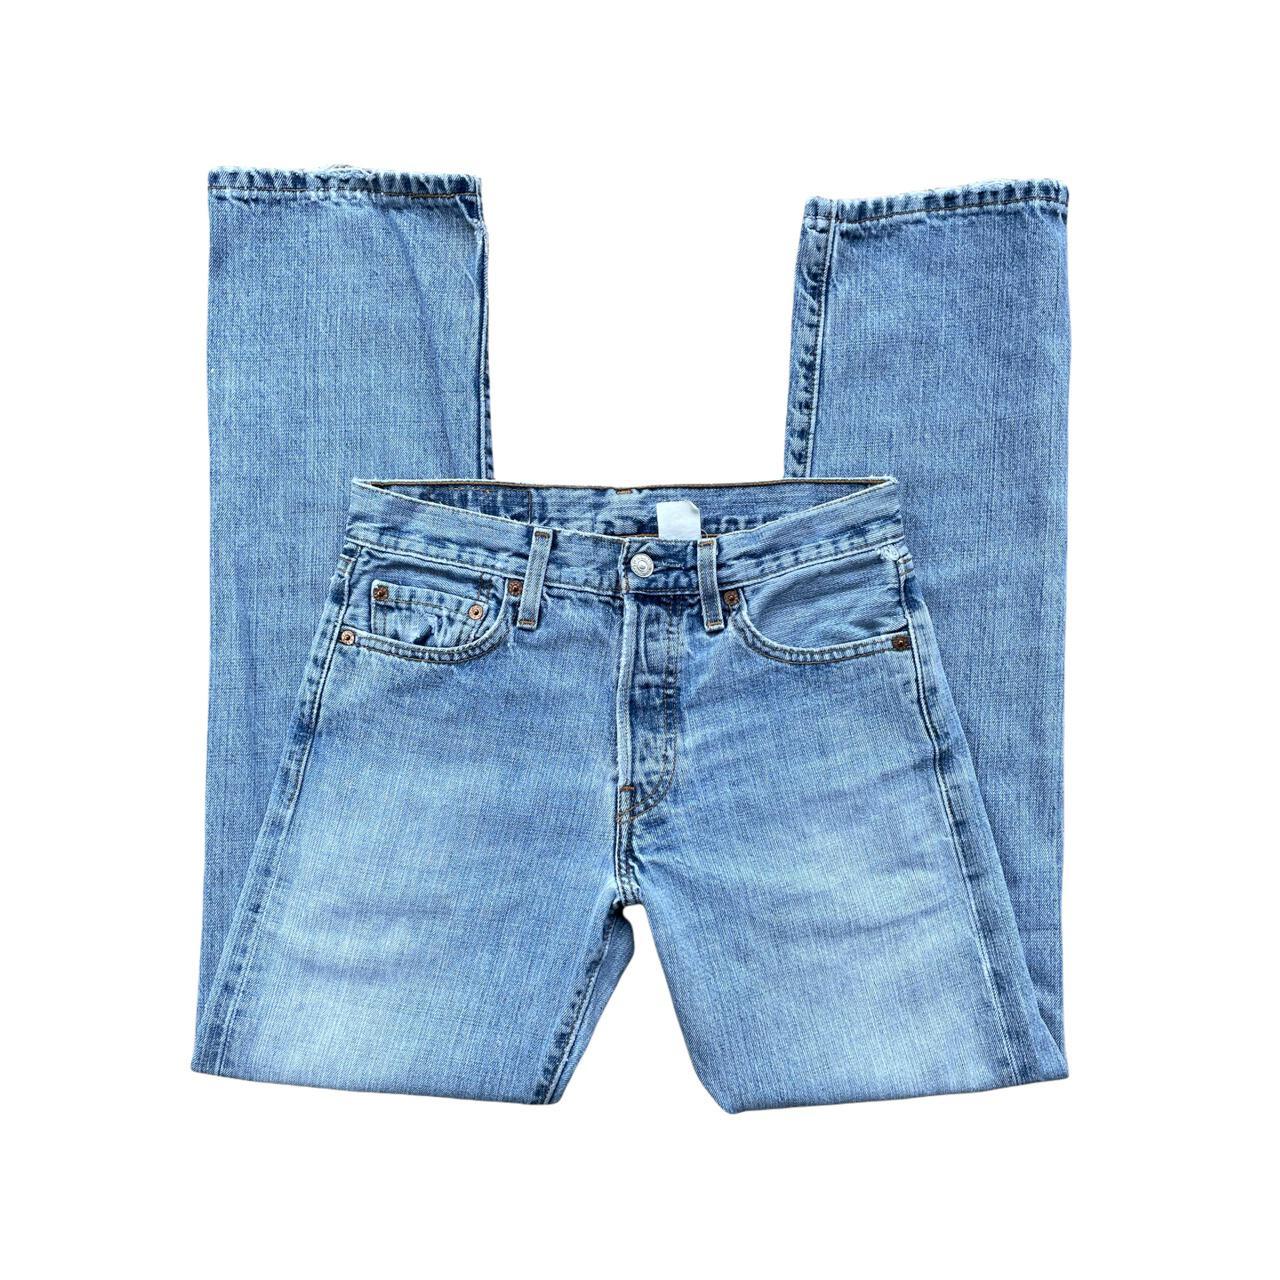 Product Image 2 - Y2K Grunge Levi’s 501 Jeans

Perfectly